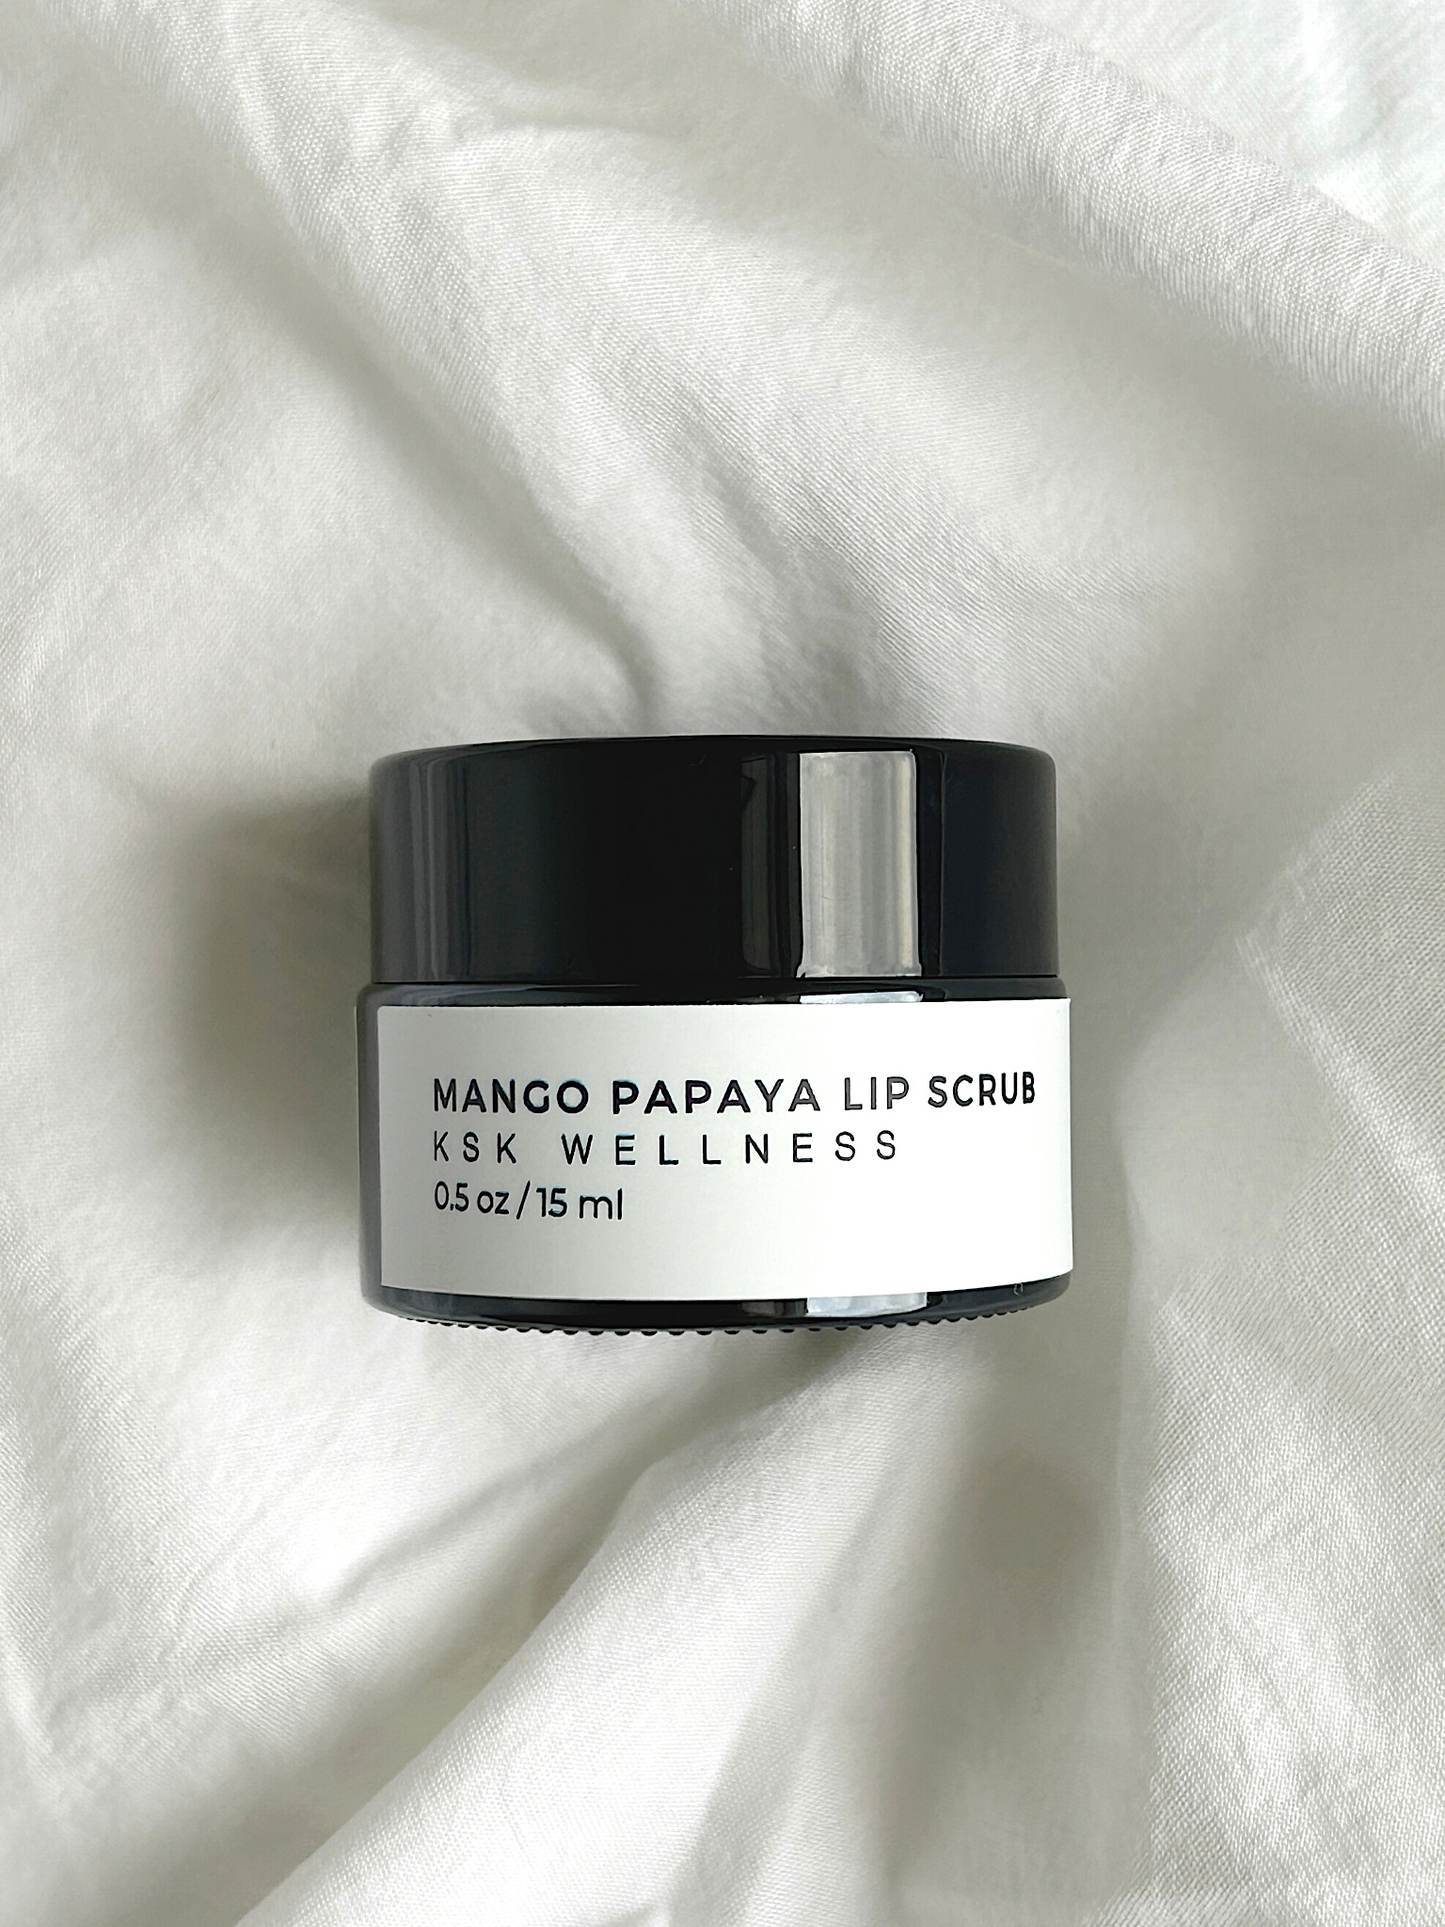 A weekly sugar lip scrub to gently exfoliate dead skin cells to reveal soft smooth lips. Dual power action with Papaya extracts is a natural enzymic exfoliator gently sloths away dull dry skin.